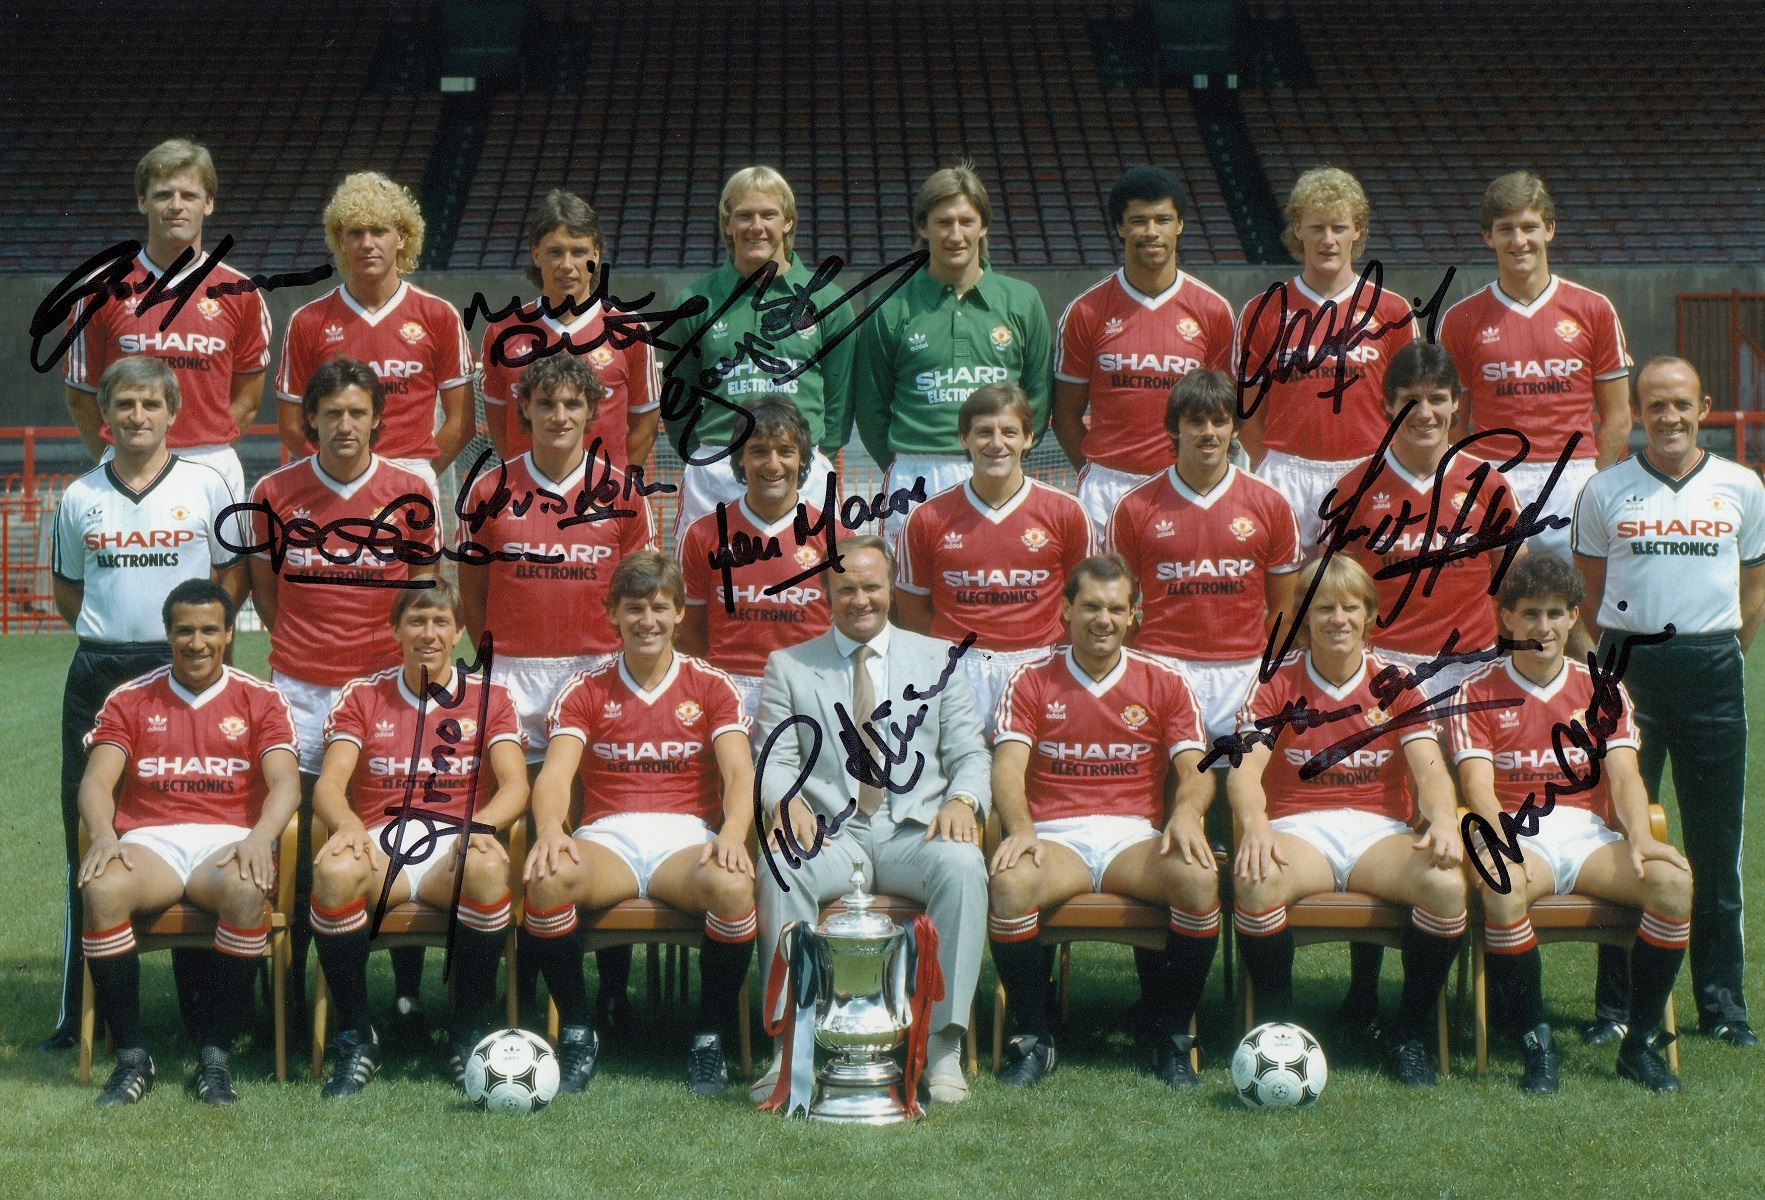 Football Autographed Manchester United Photo, A Superb Image Depicting The 1983 Fa Cup Winners -